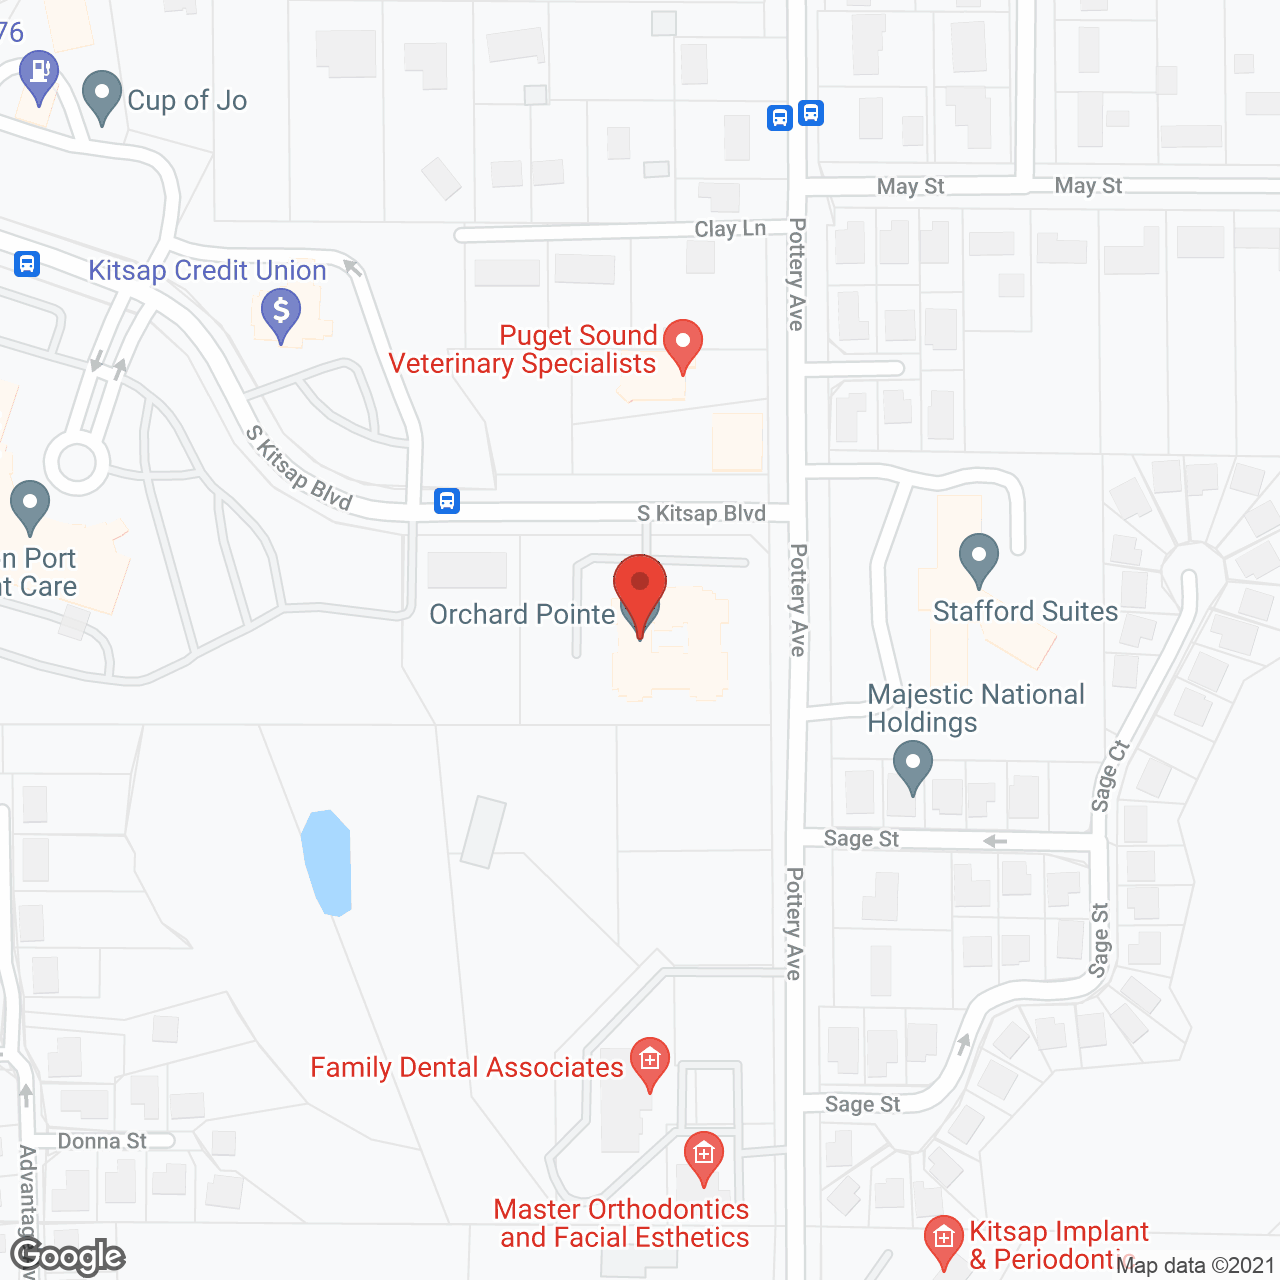 Orchard Pointe in google map